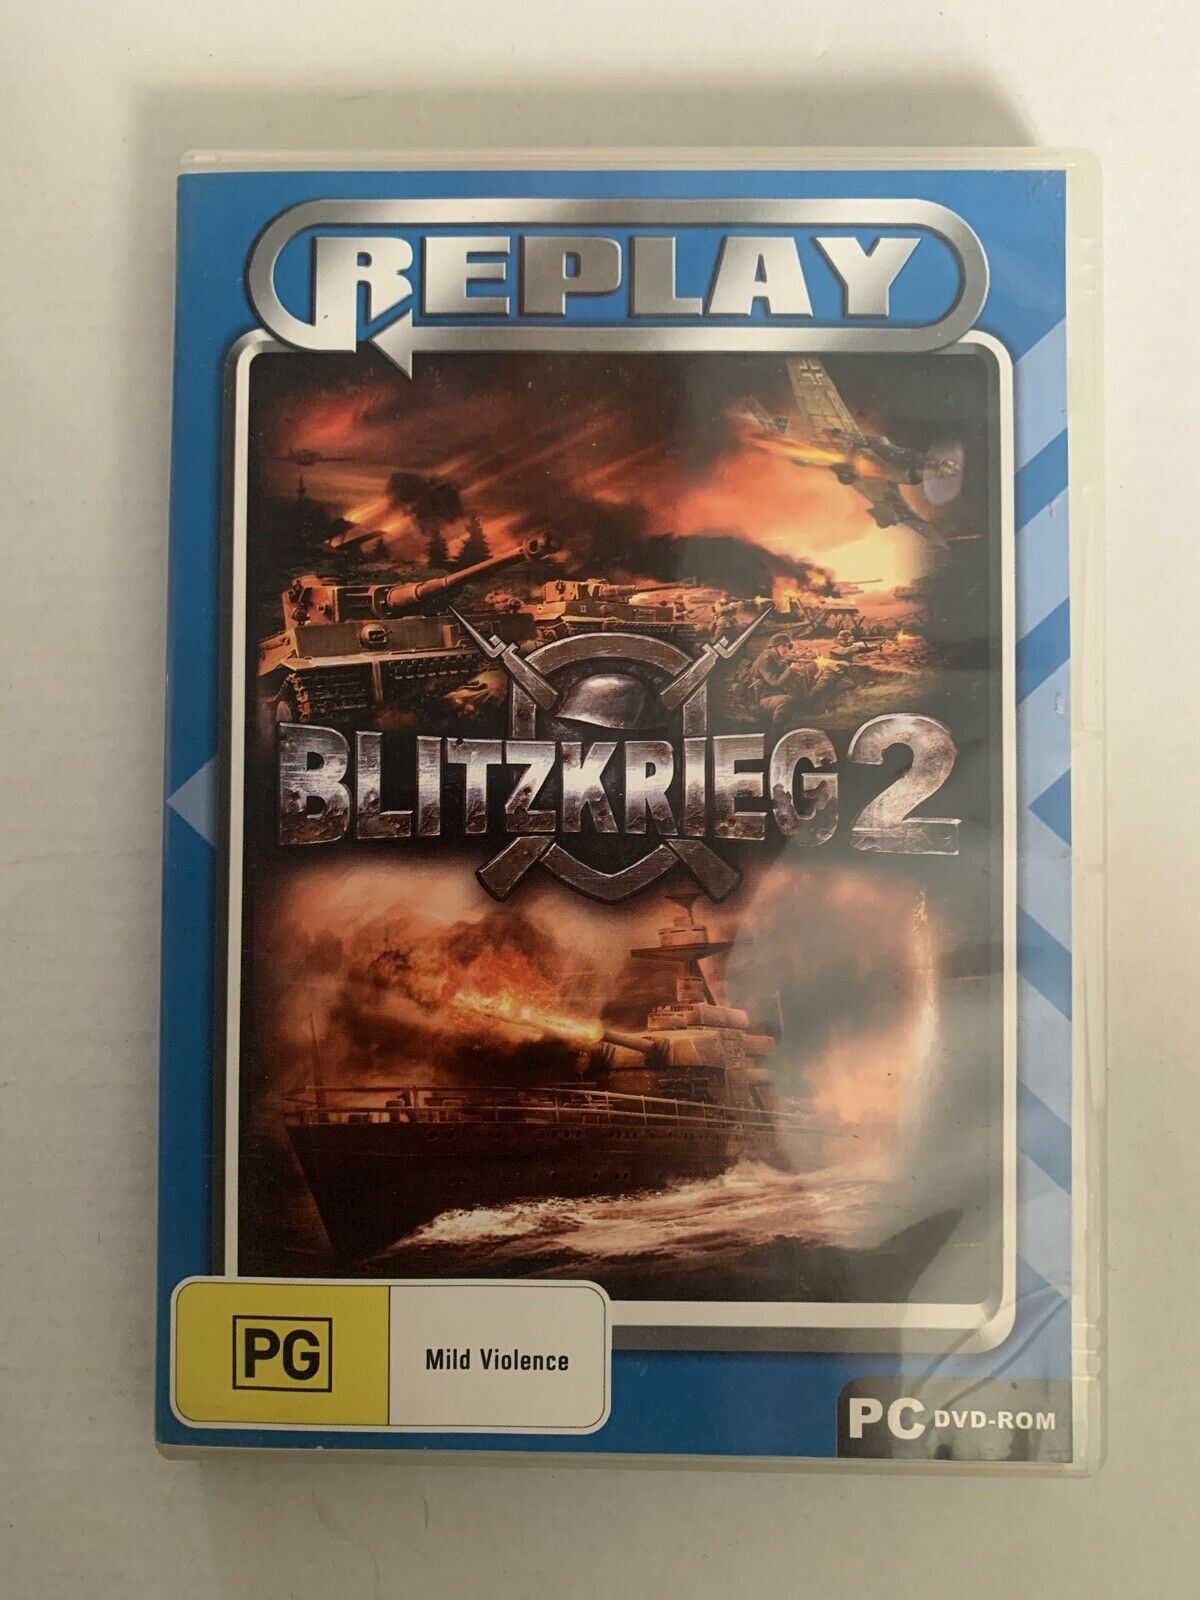 Blitzkrieg 2 (PC, 2005) - WWII Real-time Strategy RTS Game